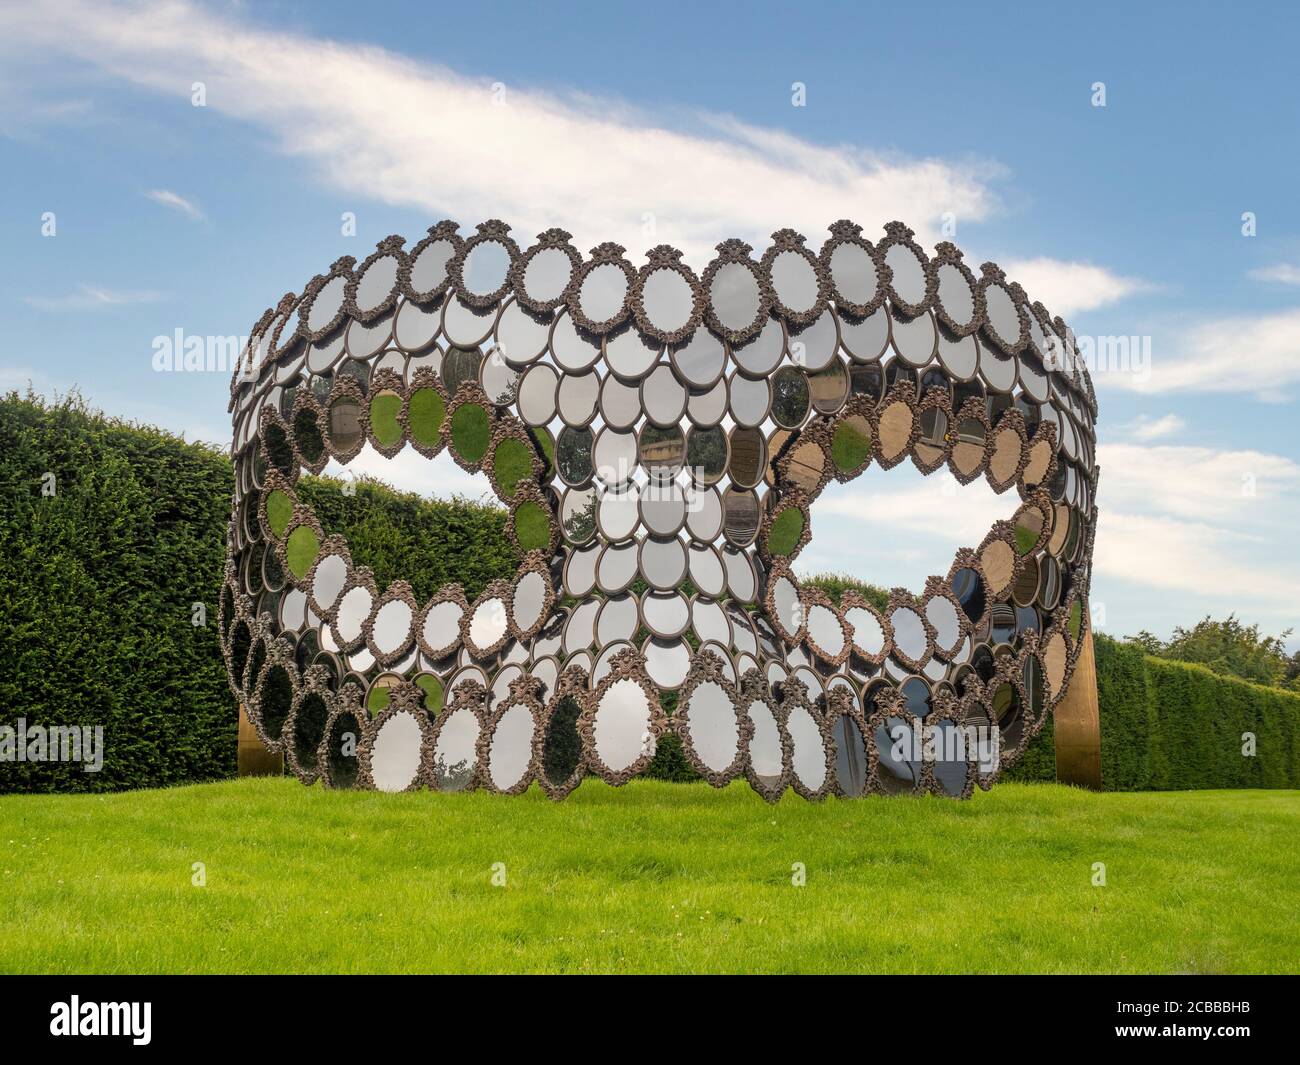 I'll be Your Mirror by Joana Vasconcelos. Large scale art installation made up of bronze mirrors Yorkshire Sculpture Park, West Yorkshire, UK. Stock Photo